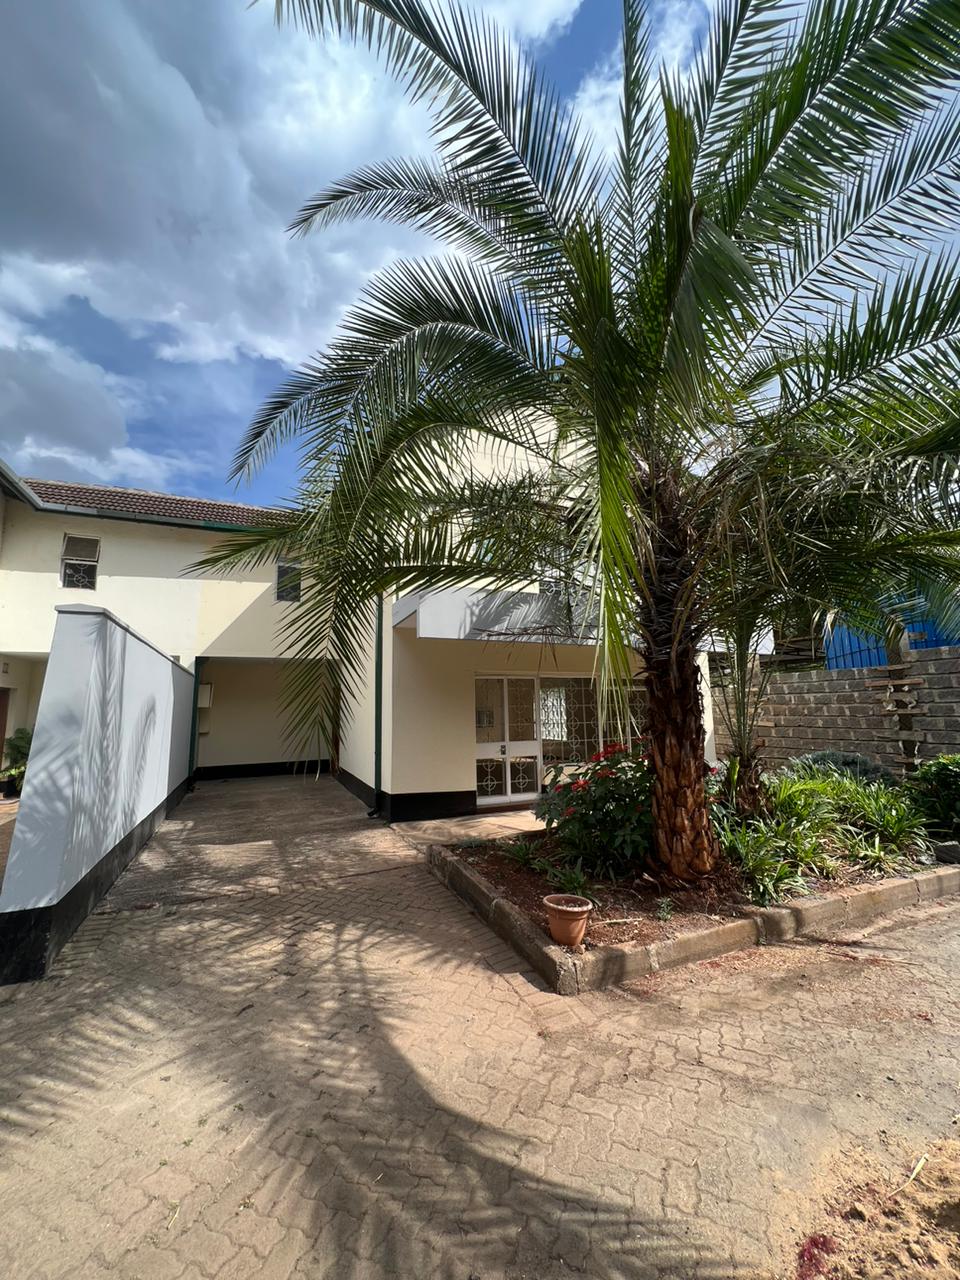 Spacious Modern 3 bedroom Maisonette to let in Kileleshwa, Nairobi. Gated community. Few units in the compound. DSQ. Rent 150,000Musilli Homes Pam Golding